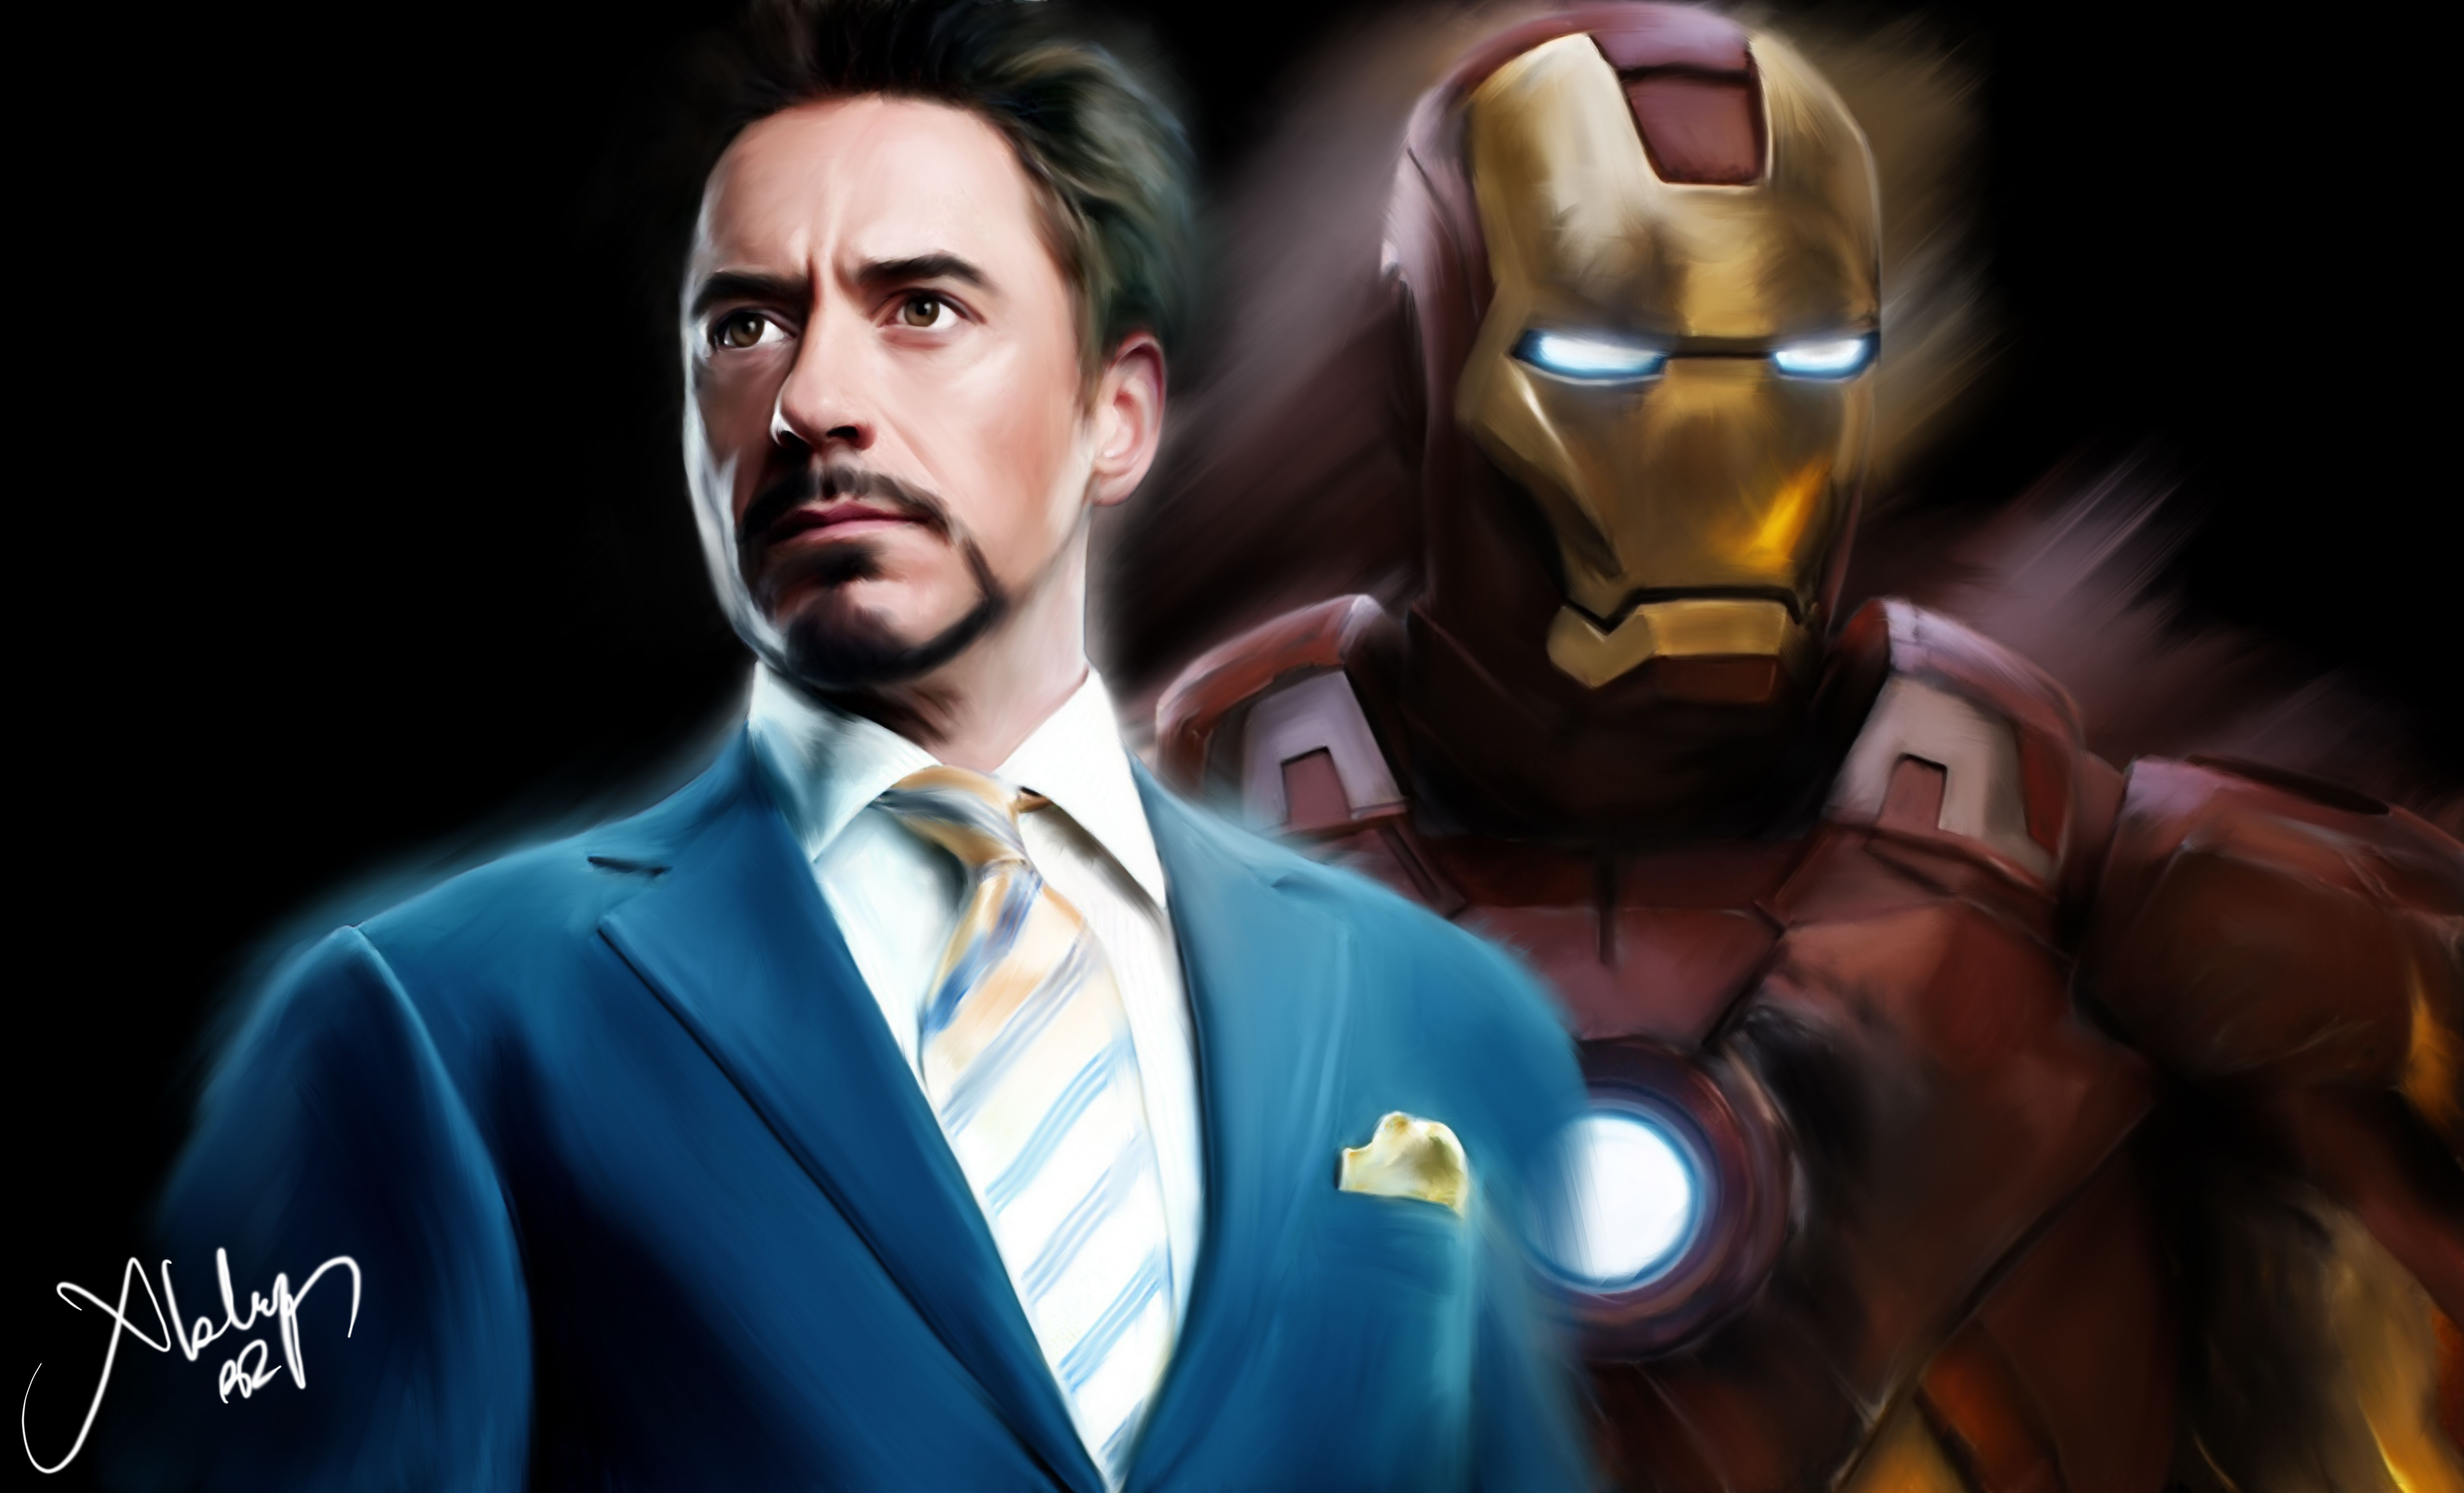 1280x1024 Tony Stark As Iron Man Portrait Artwork 5k 1280x1024 Resolution HD  4k Wallpapers, Images, Backgrounds, Photos and Pictures